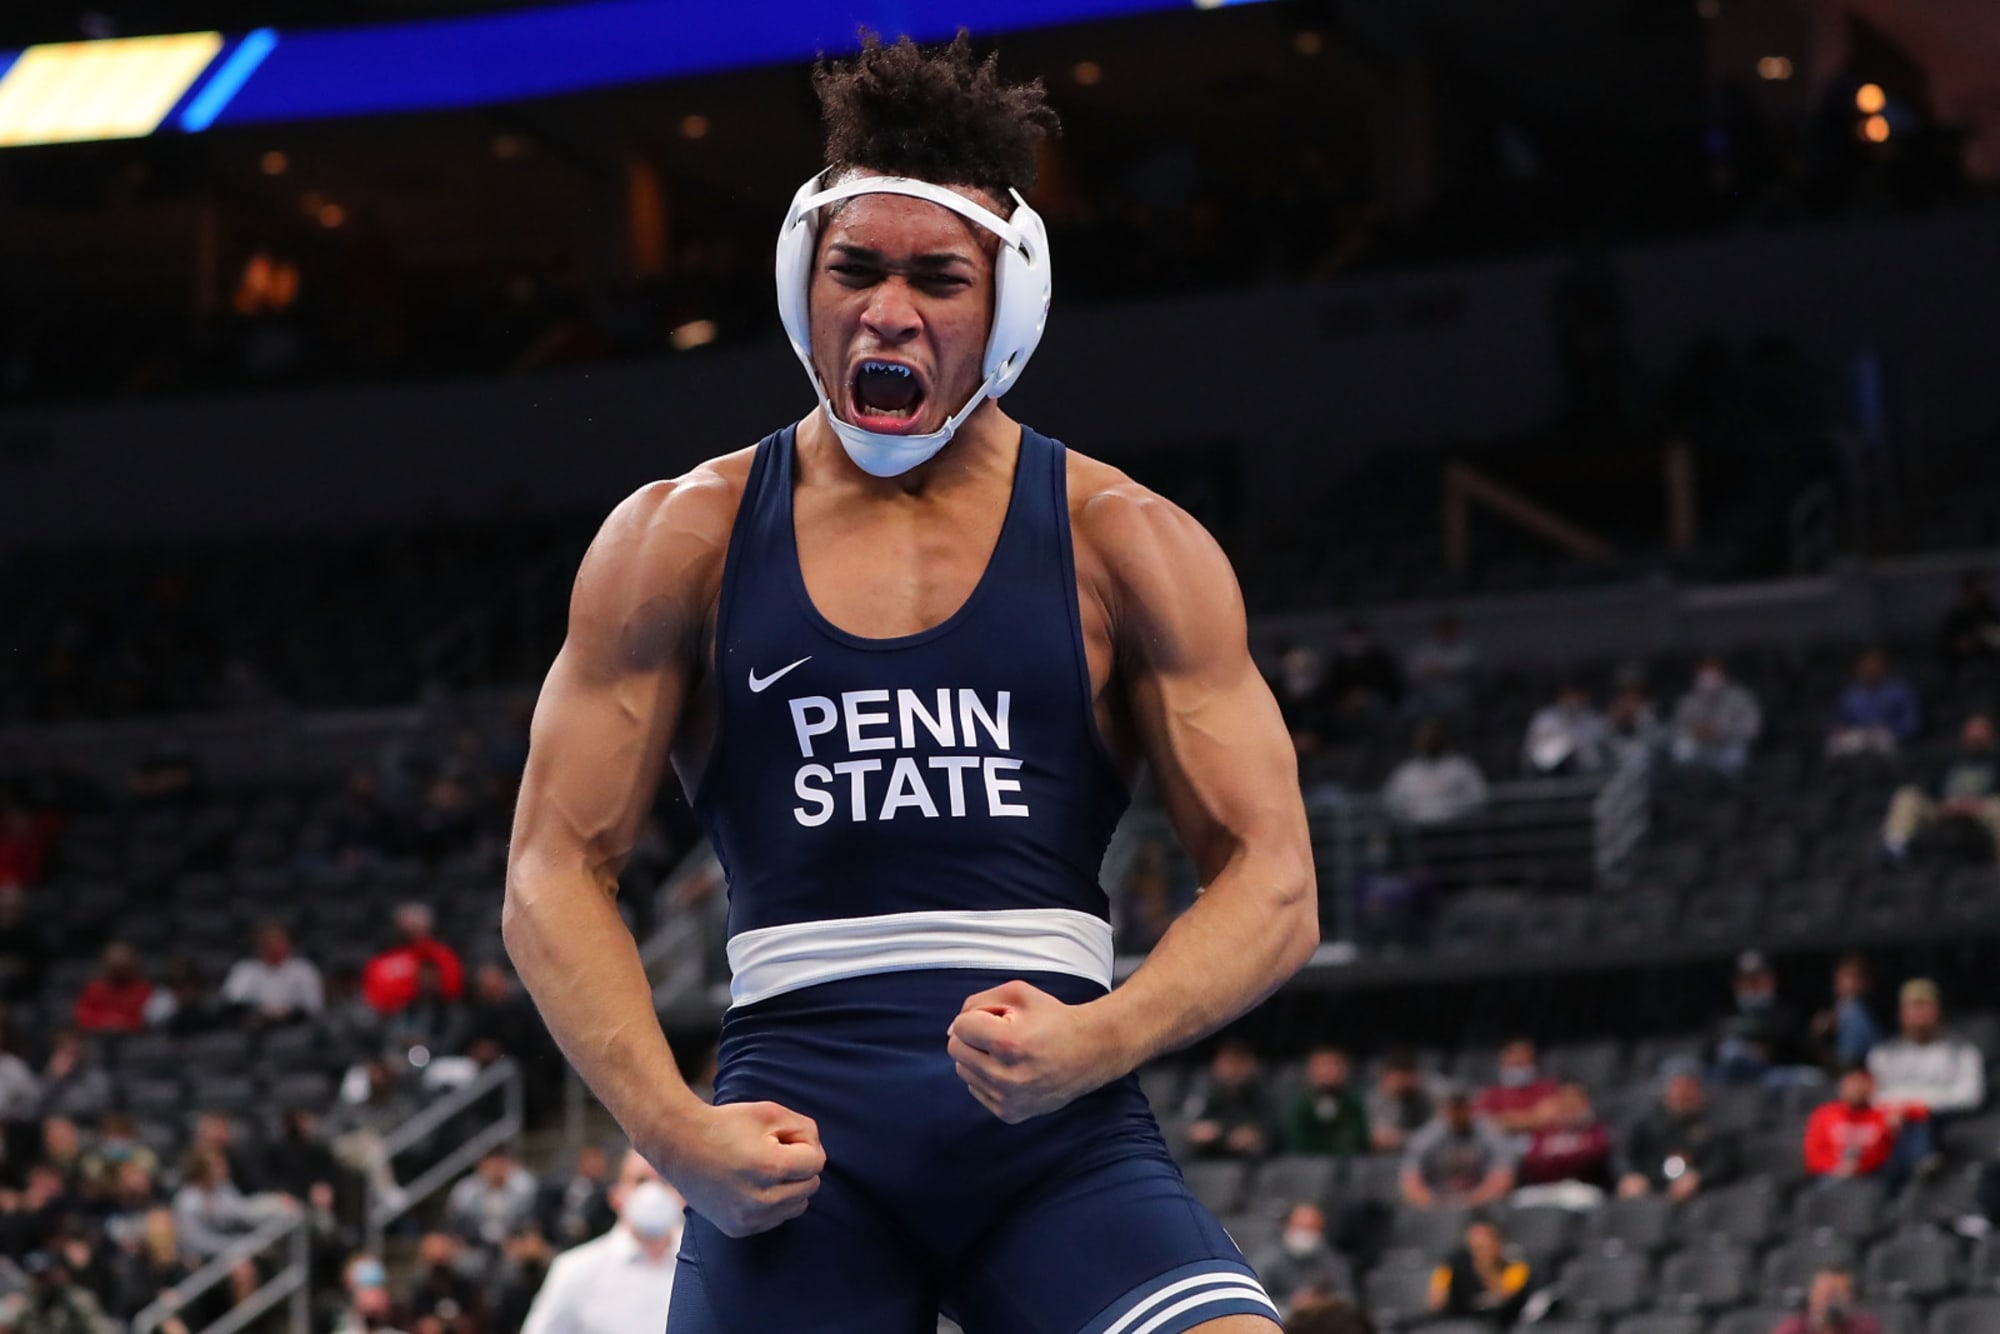 NCAA Championships Penn State Wrestling's path to another national title